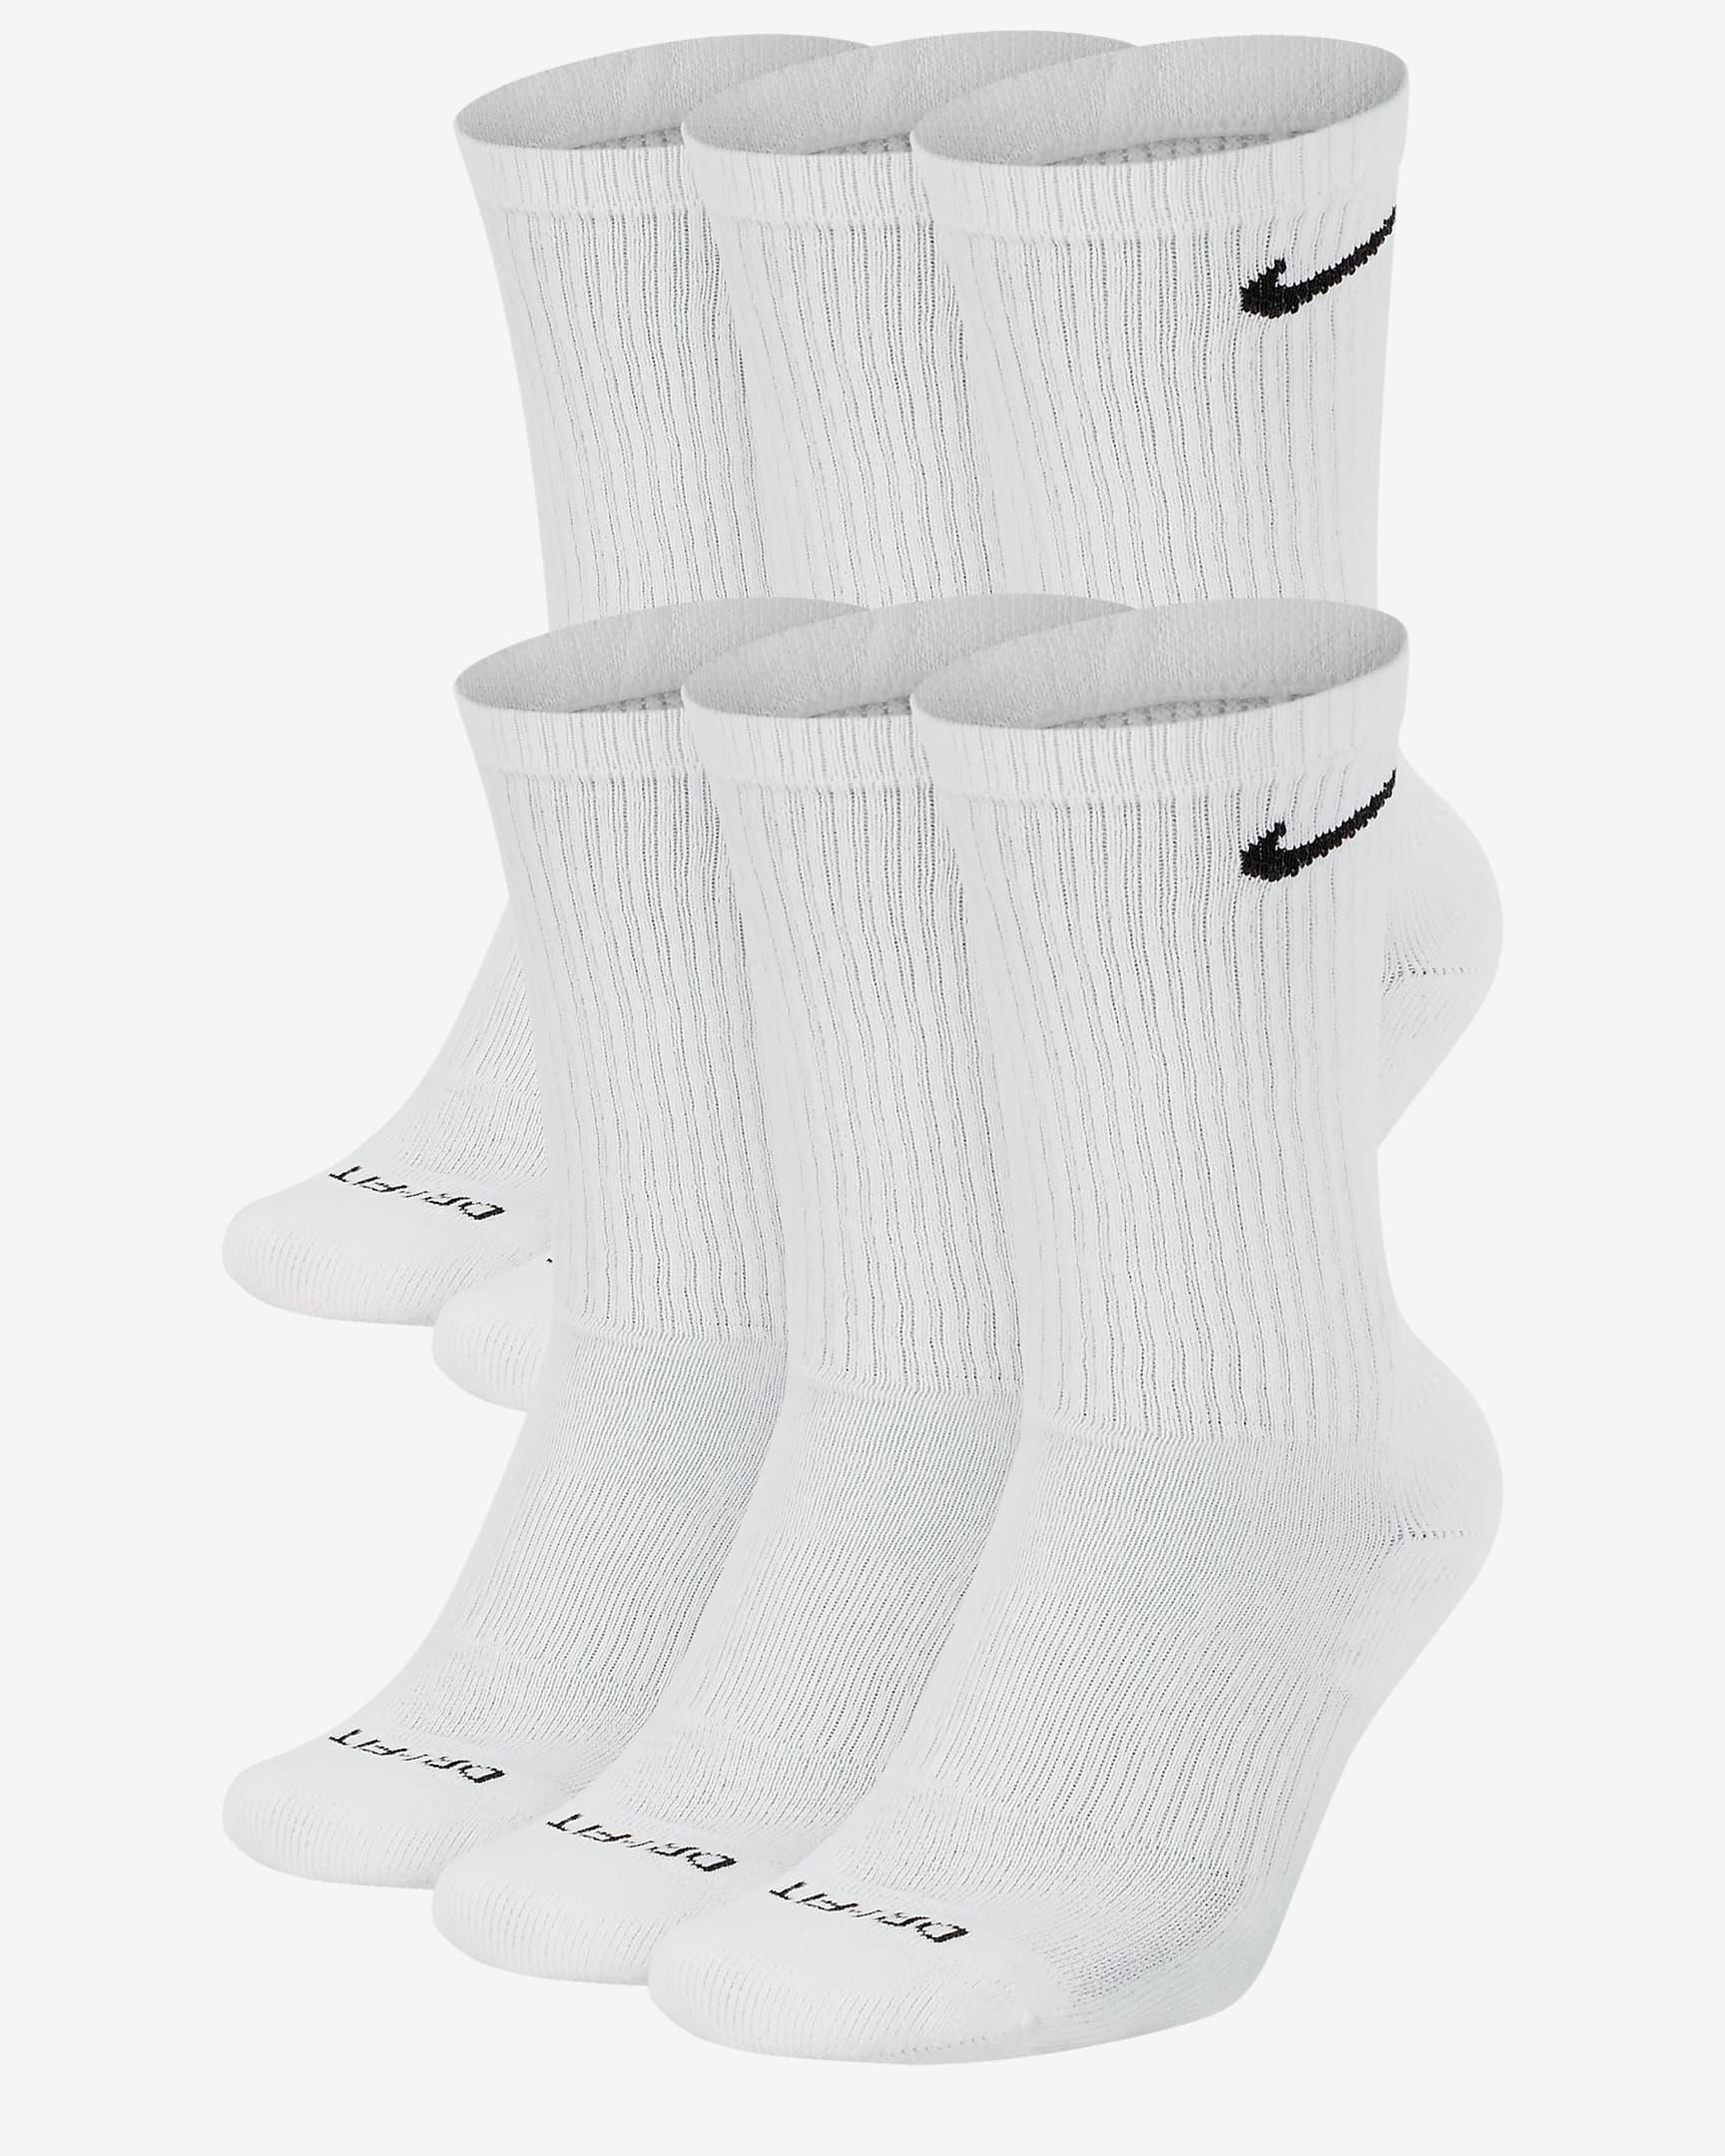 Mid-Calf Socks The Best Affordable